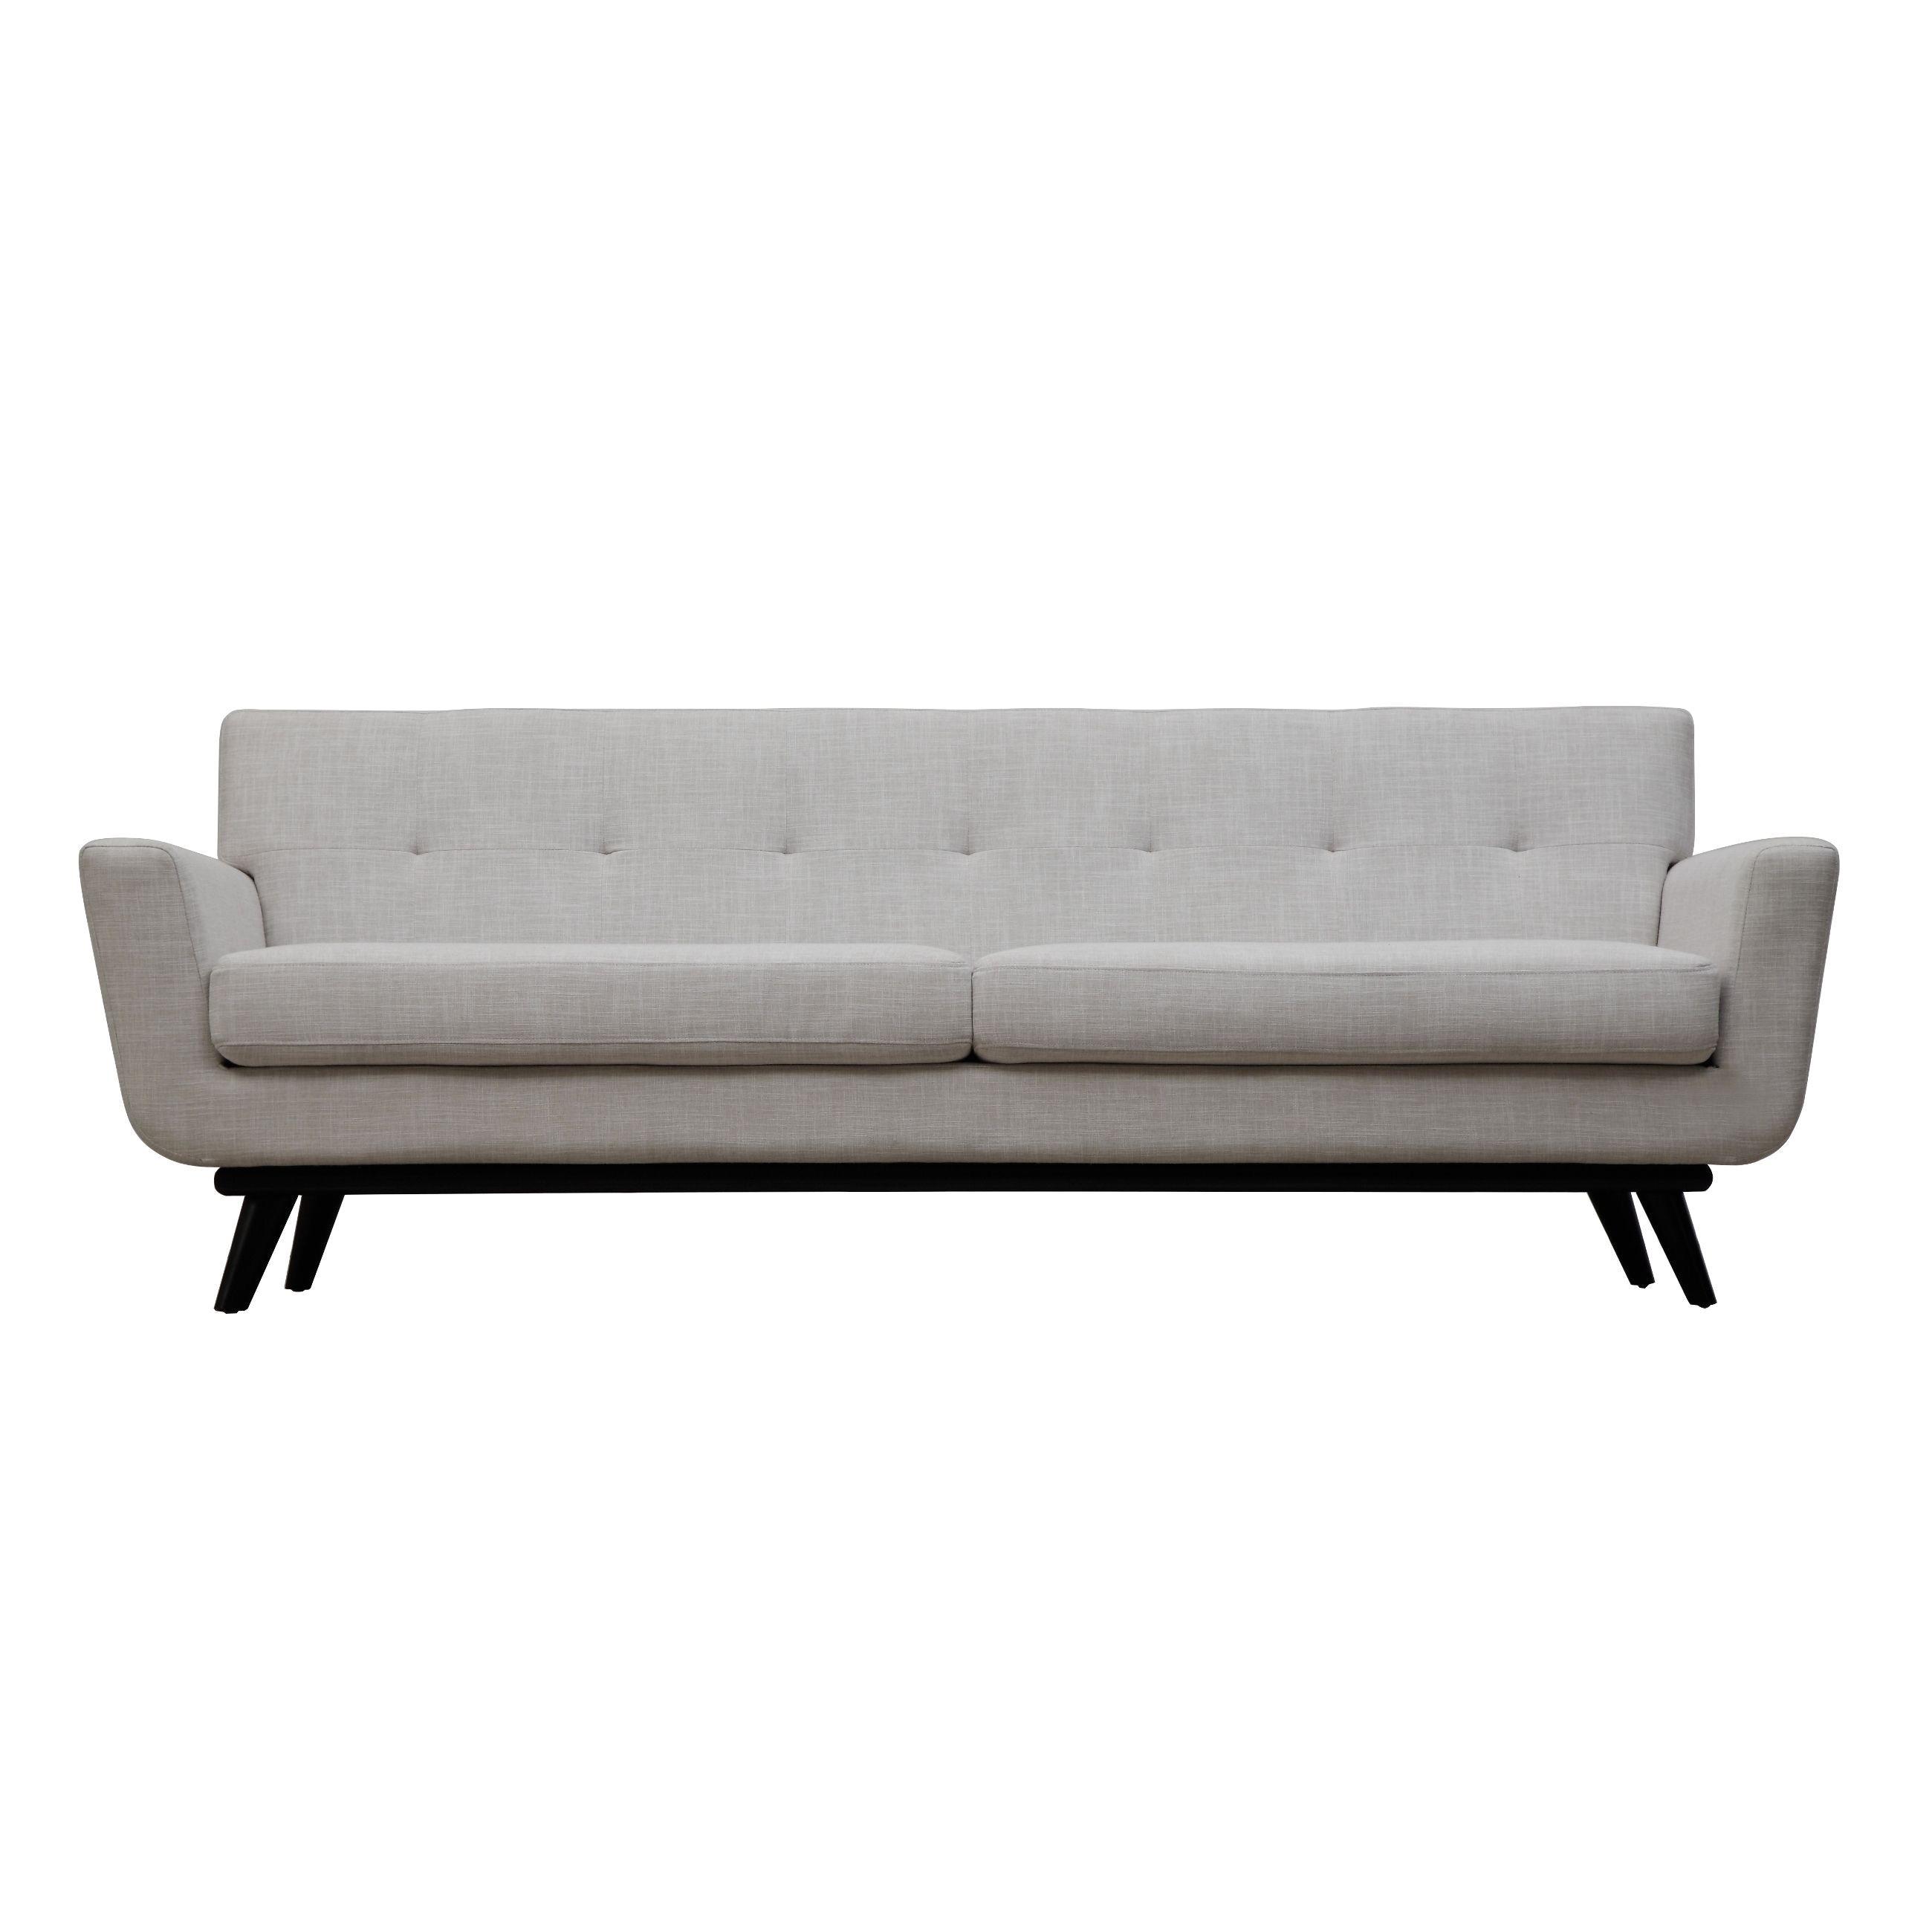 strong and handsome with a soft side the calvin sofa captures the essence of